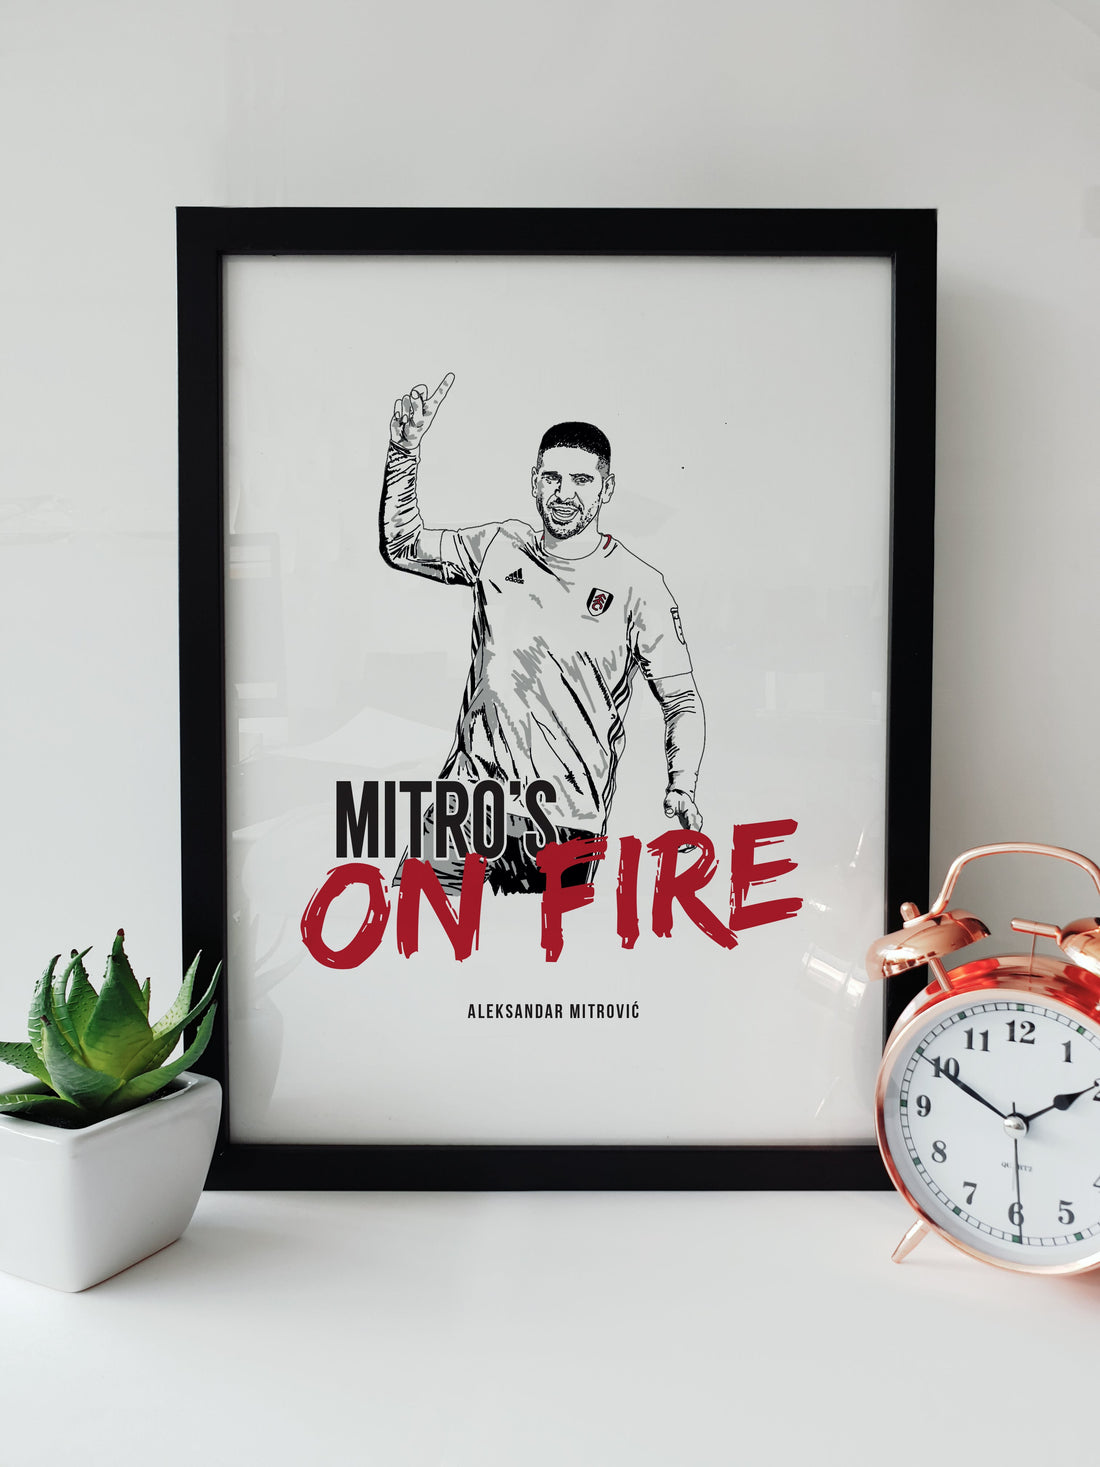 mitros on fire aleksandar mitrovic fulham football club artwork hand drawn player illustration framed picture. Craven cottage merchandise designed by a town called home 